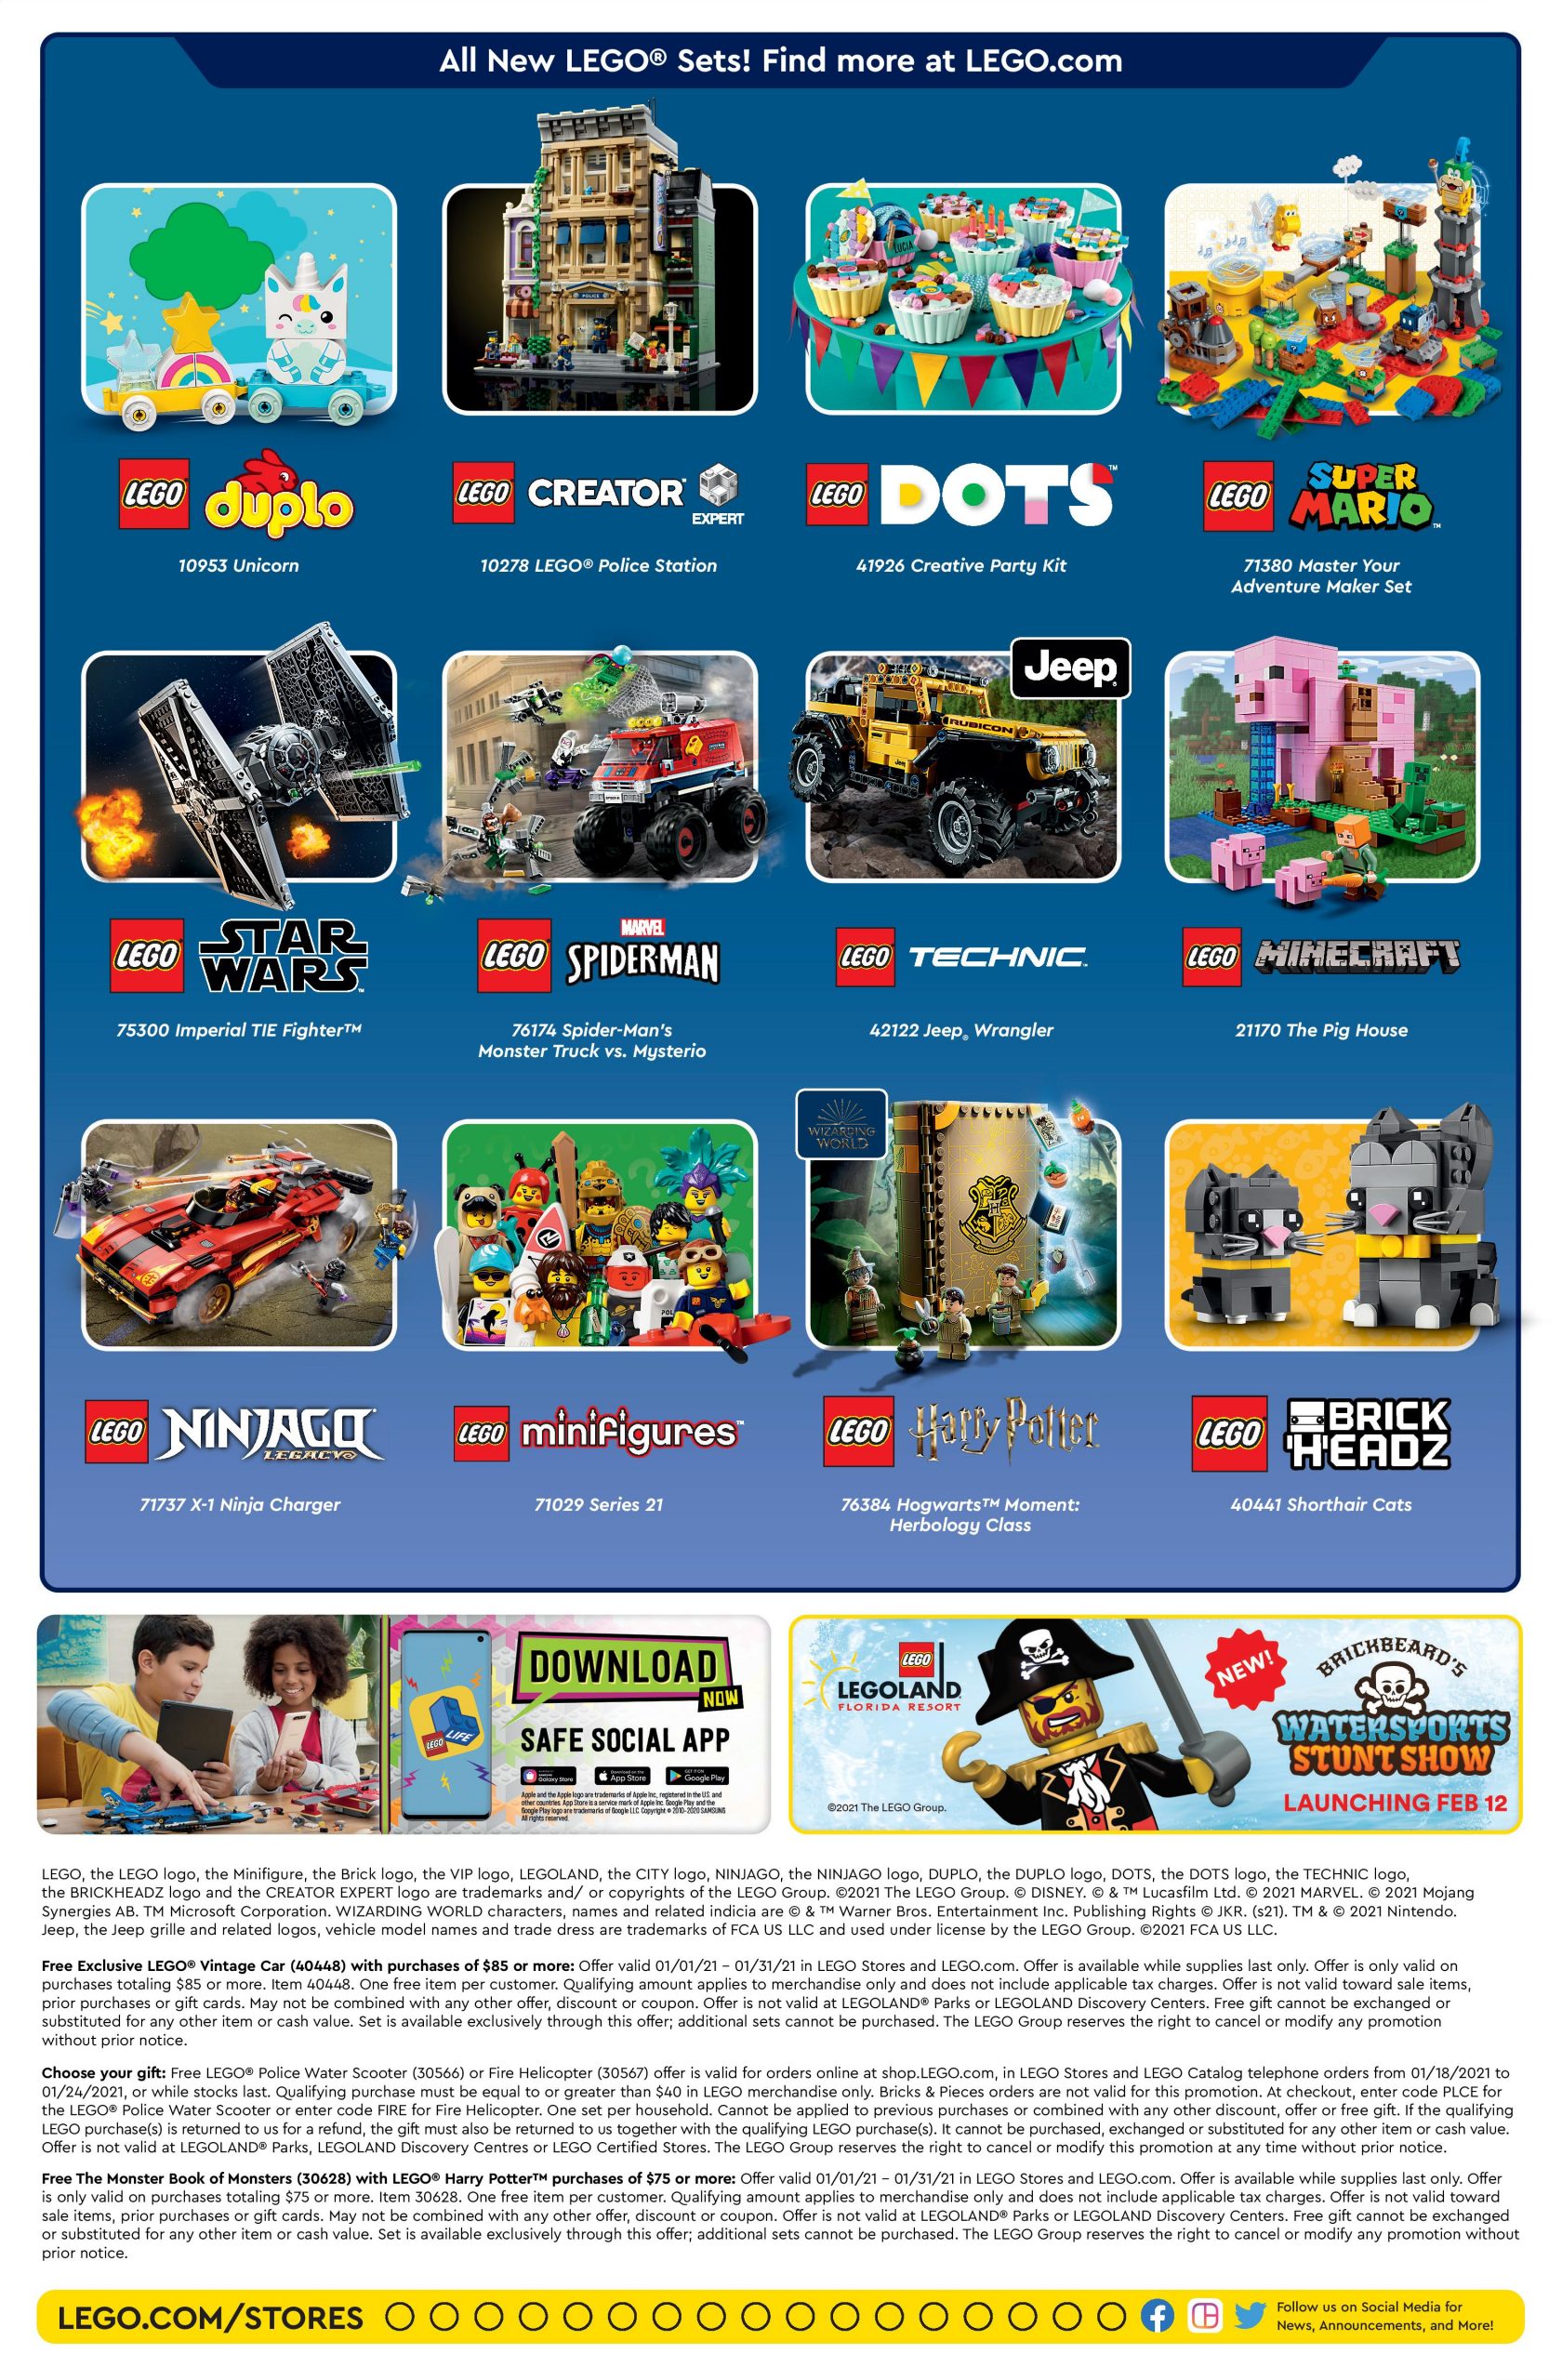 LEGO January 2021 Store Calendar Promotions & Events - The ...